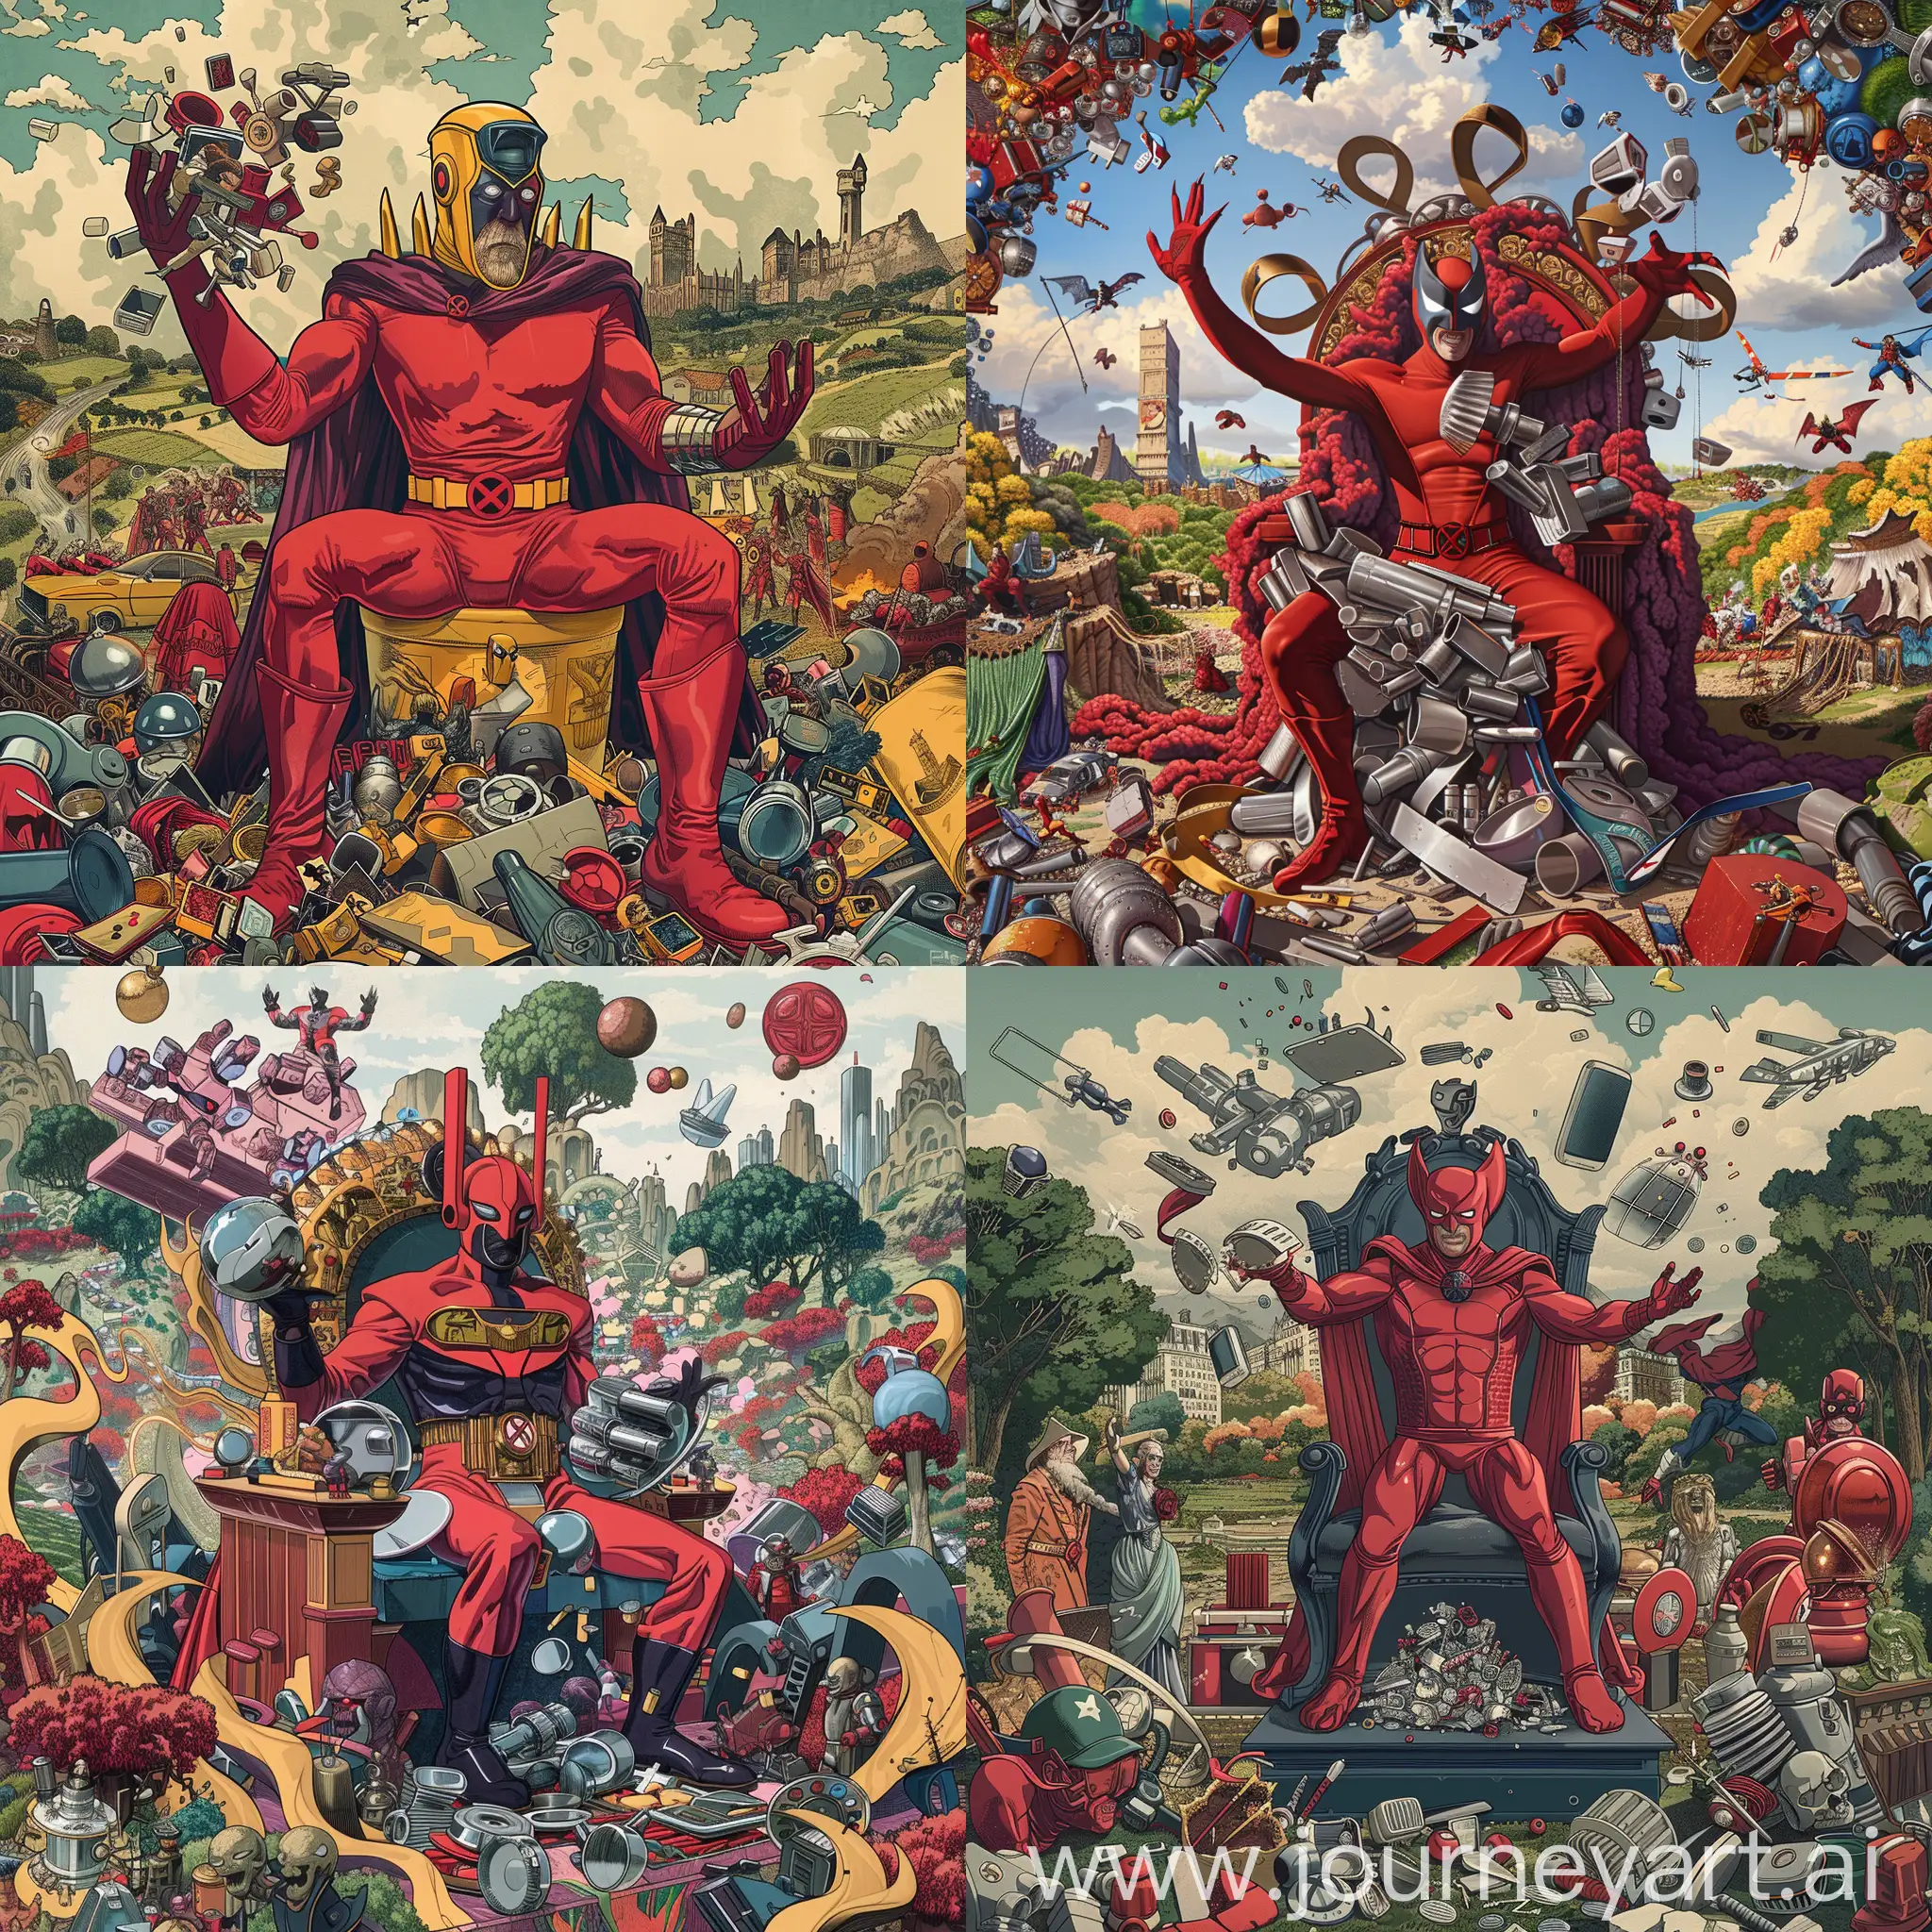 Imagine a phone wallpaper that merges Magneto's magnetic personality with Robert Colescott's vivid storytelling style. Depict Magneto playfully rearranging metallic objects to form a throne, surrounded by a Colescottian landscape filled with bold colors and whimsical takes on historical and social motifs. This design would reflect both the power and complexity of the character, as well as Colescott's unique artistic vision.
--ar 9:16